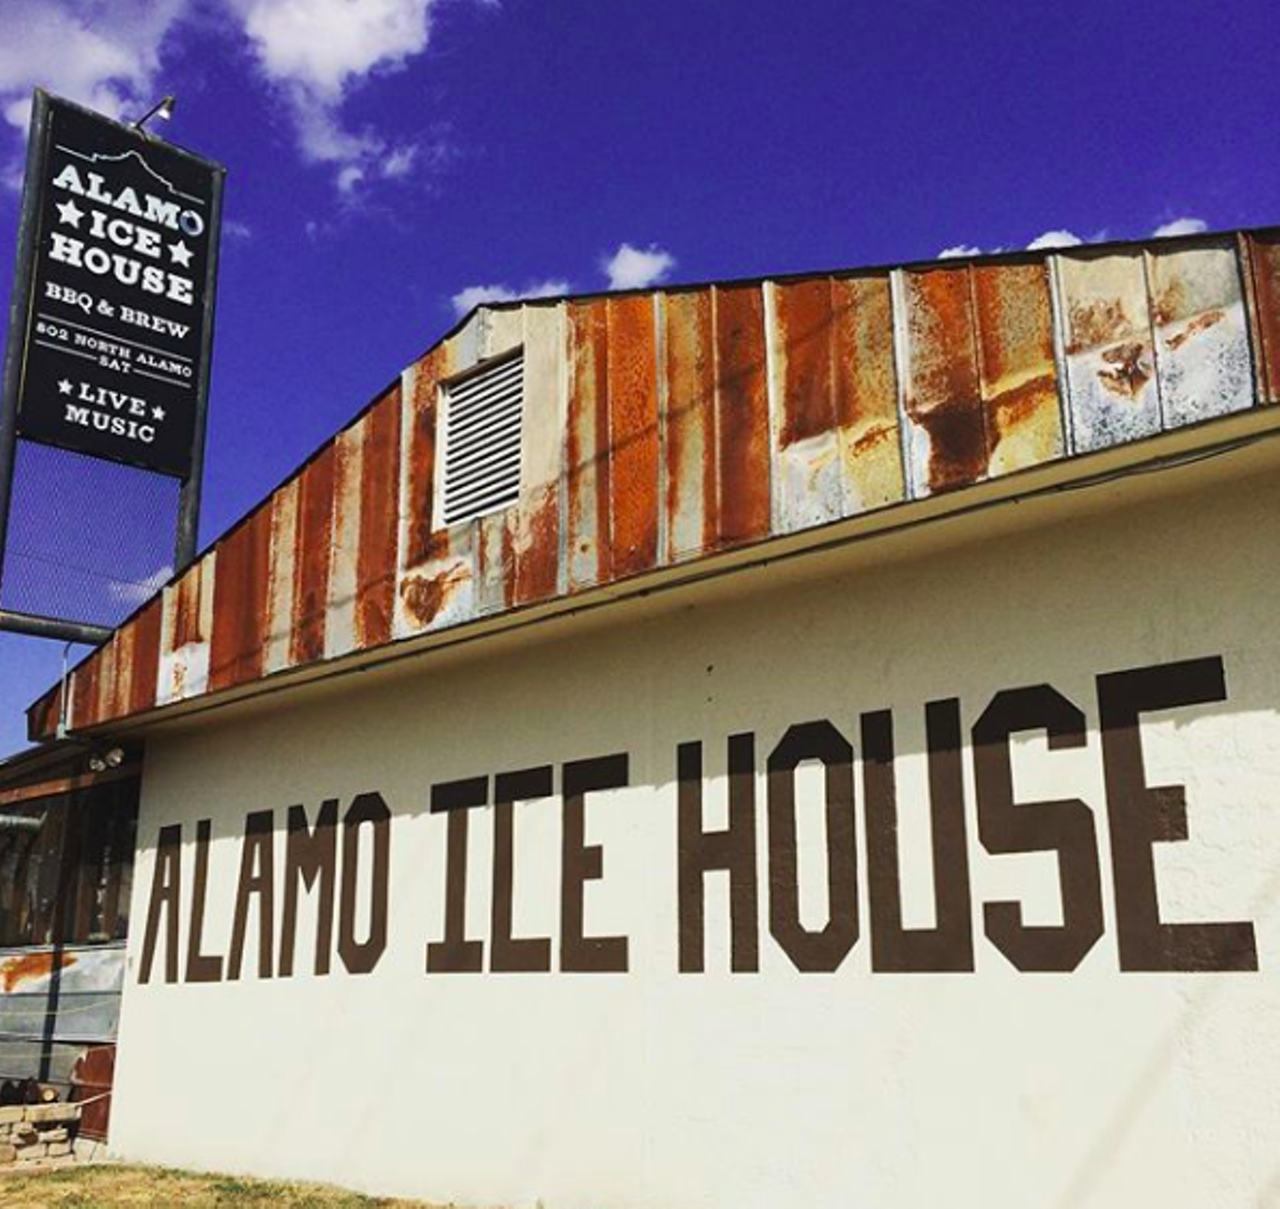 Alamo Ice House BBQ & Brew
802 N Alamo St
Opening in 2014, the owners at Alamo Ice House announced the closing of the popular hang-out on New Year’s Day. They went out with a bash just a week later.
Photo via Instagram / do210